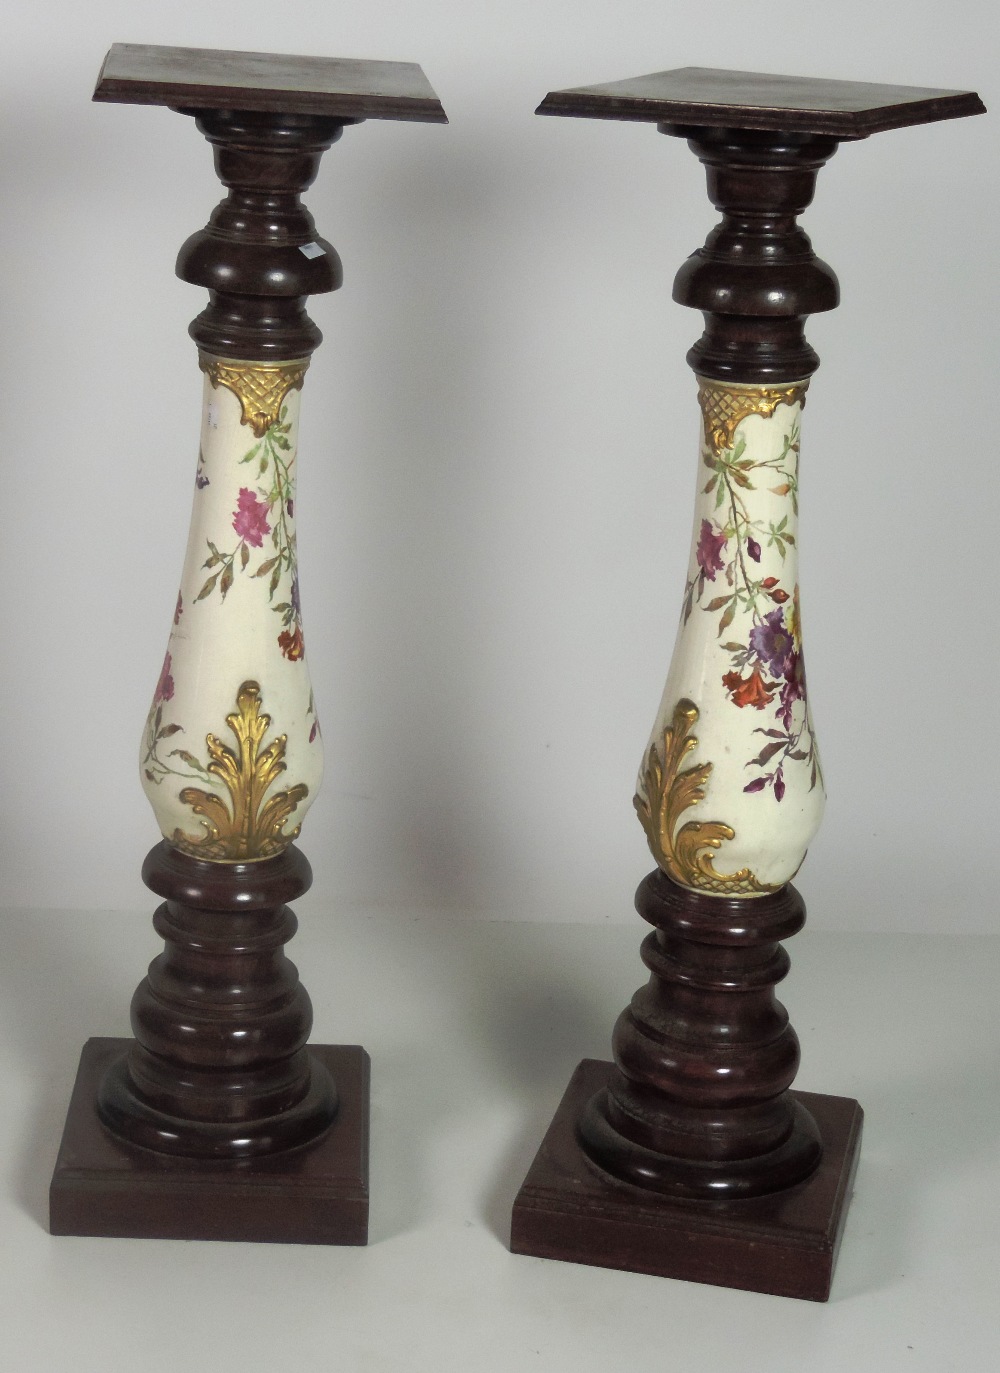 An unusual pair of tall porcelain and wooden Plinths, the pillars decorated with flowers, each